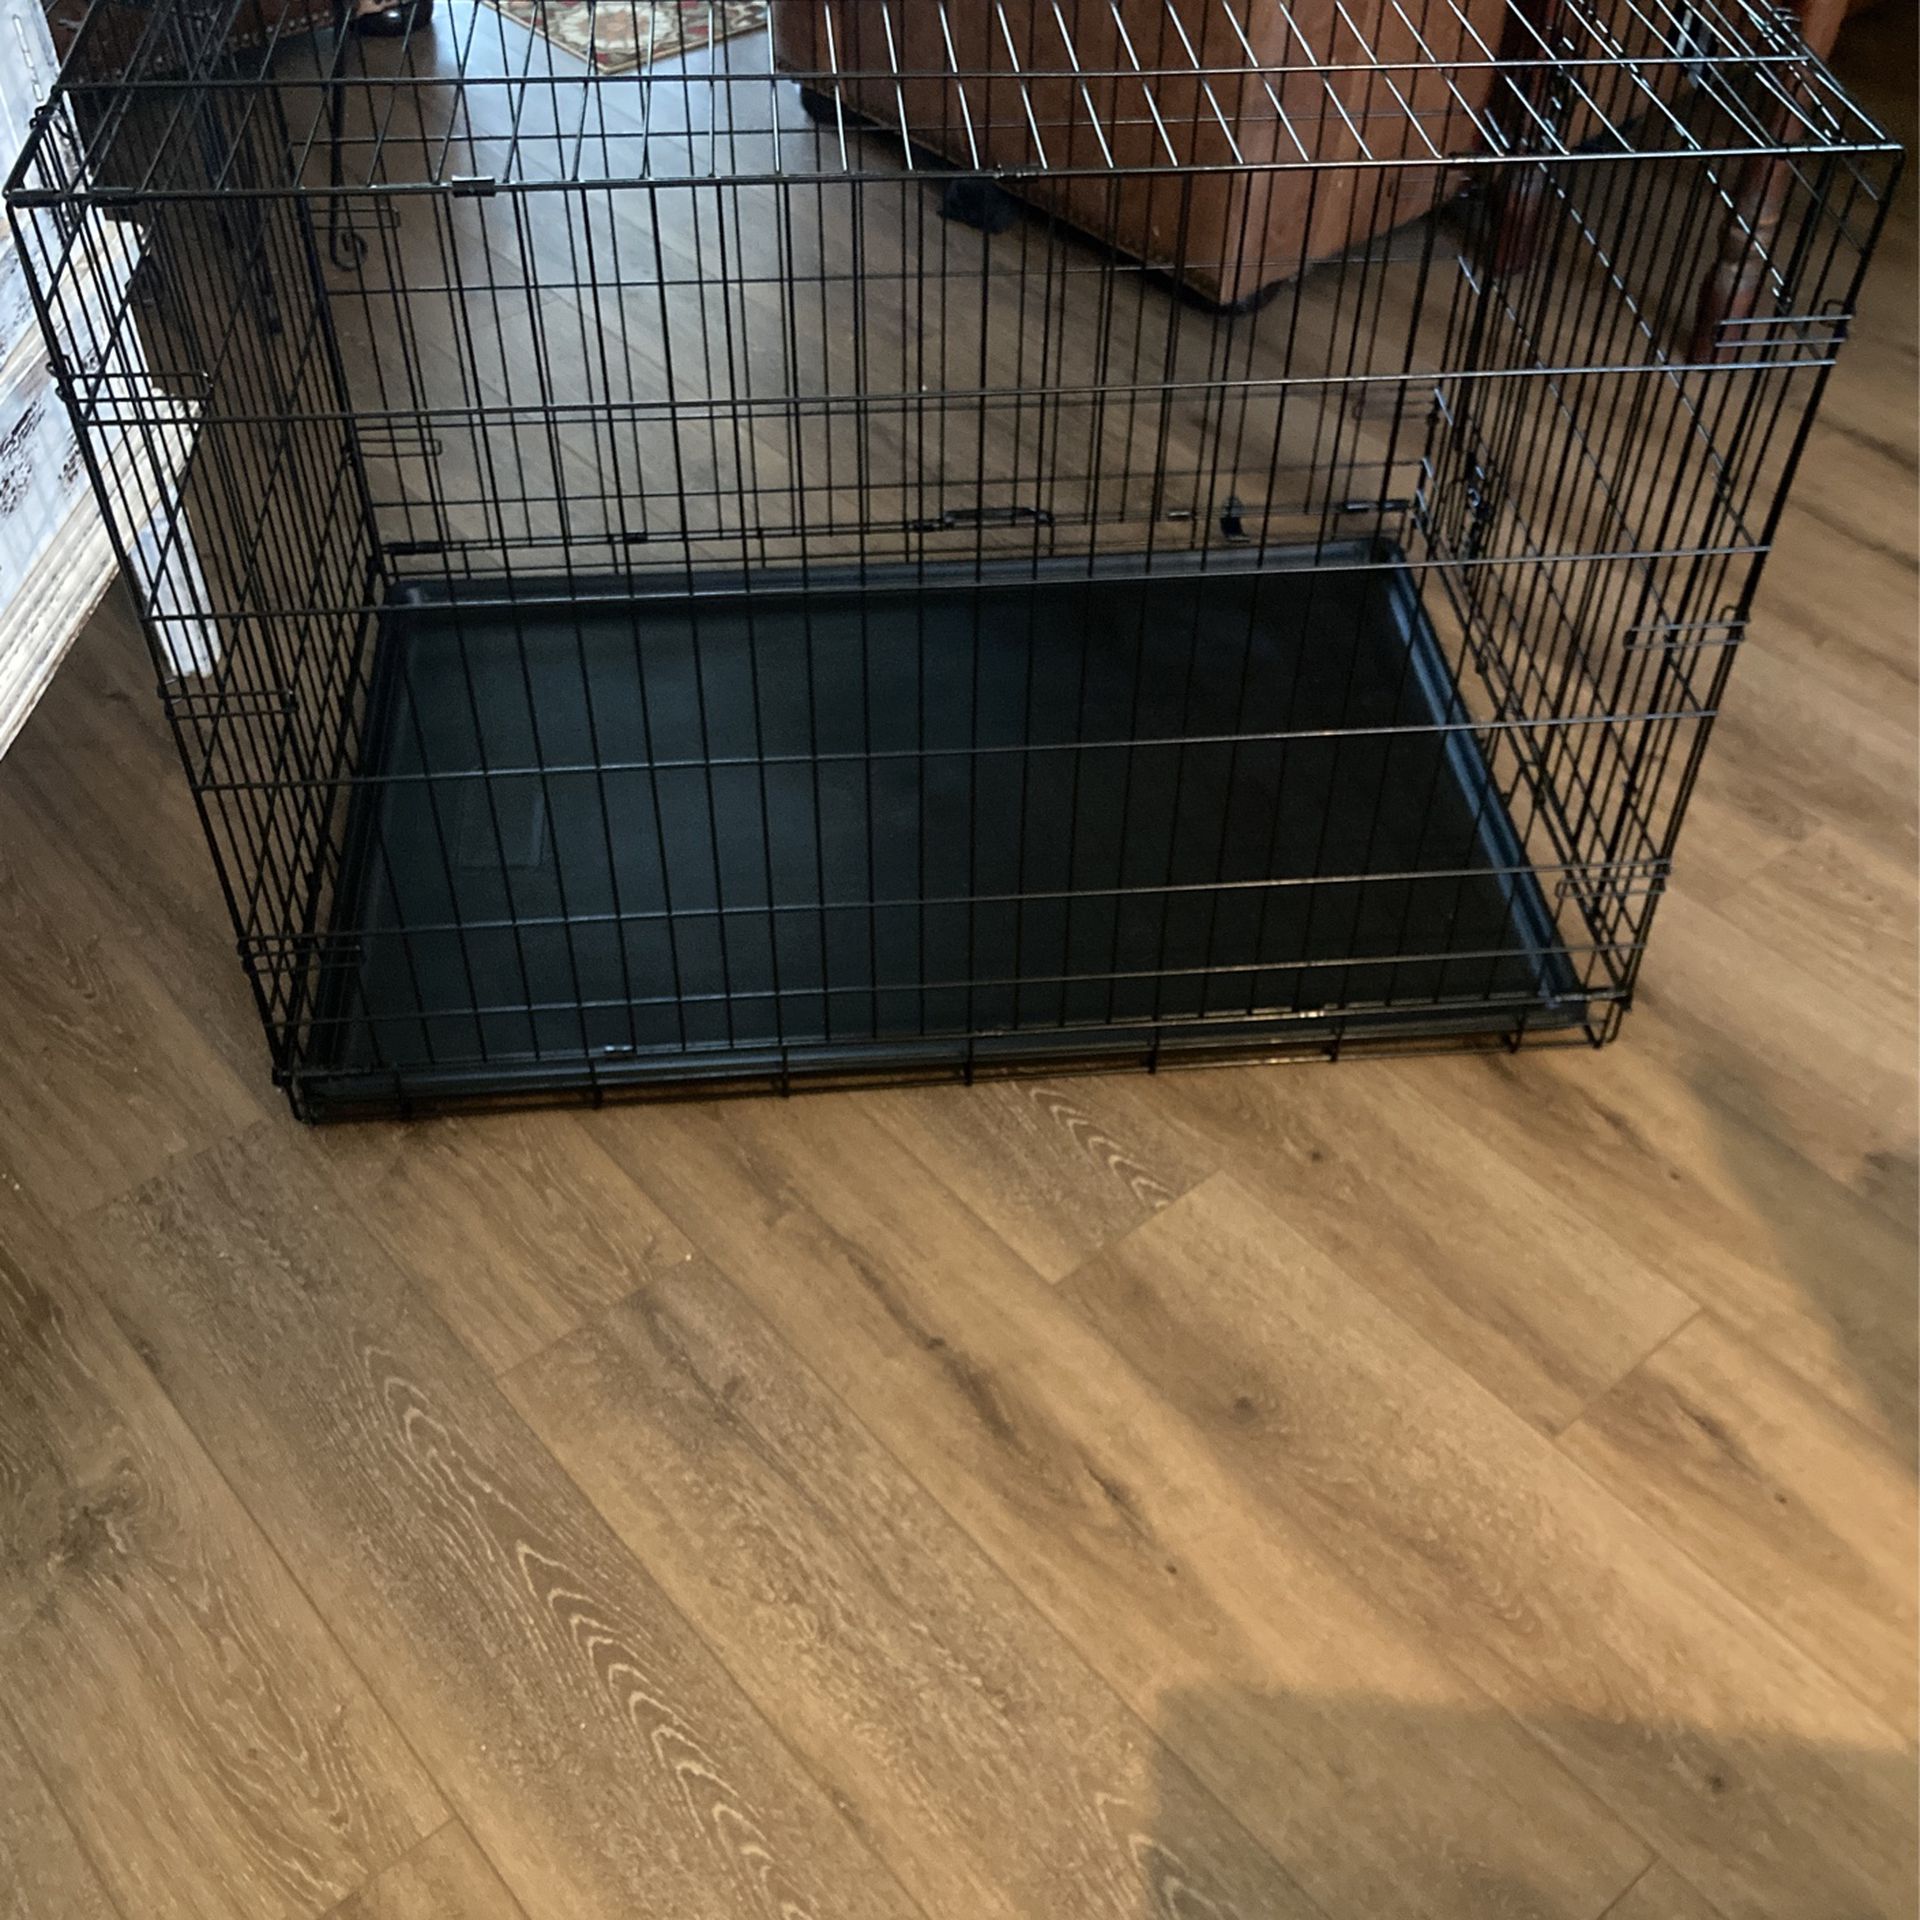 Large Dog Crate/Kennel